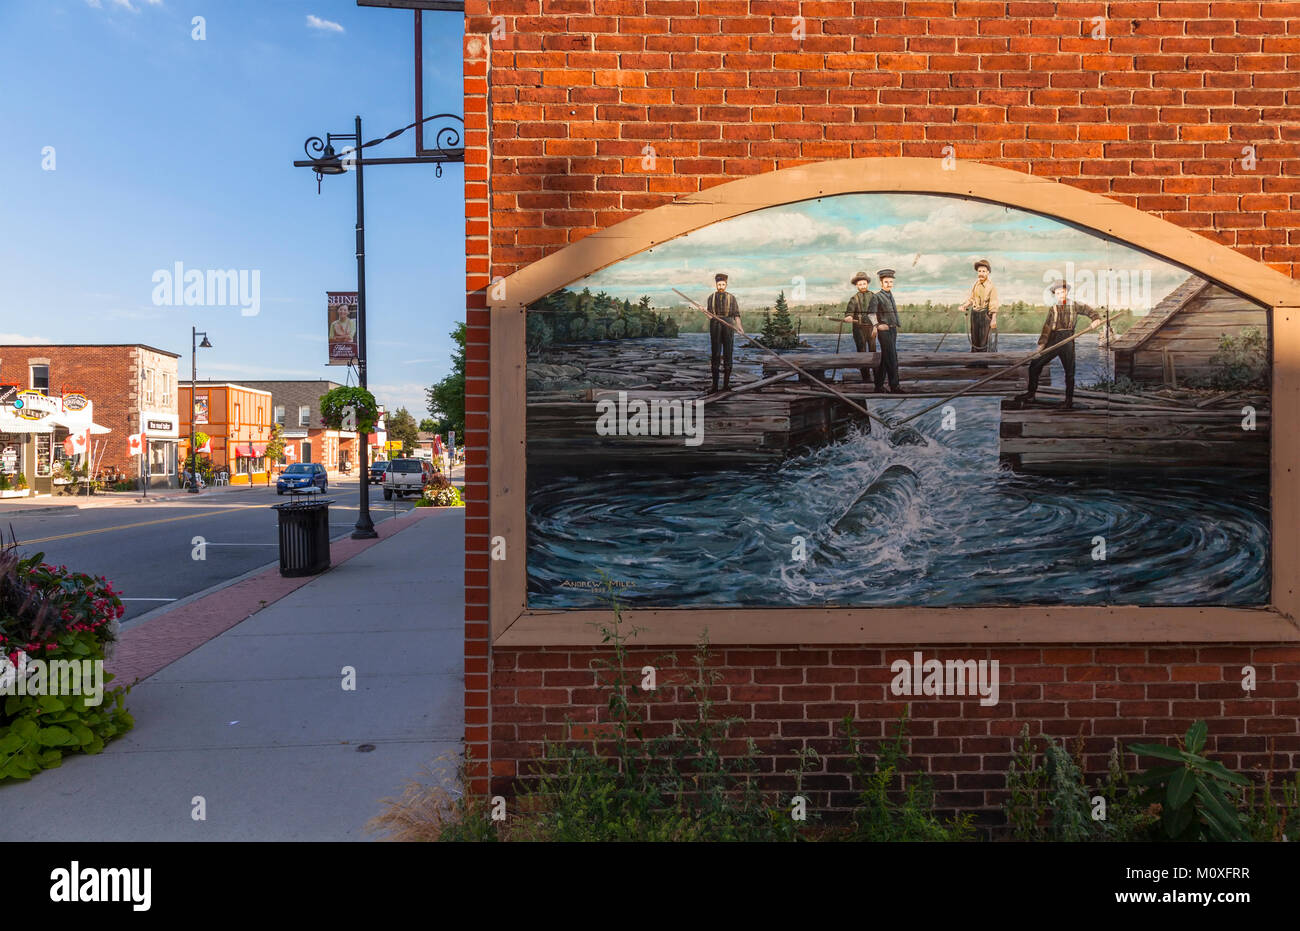 A mural depicting the logging history in Muskoka on the wall of a building in downtown Gravenhurst, Ontario, Canada. Stock Photo